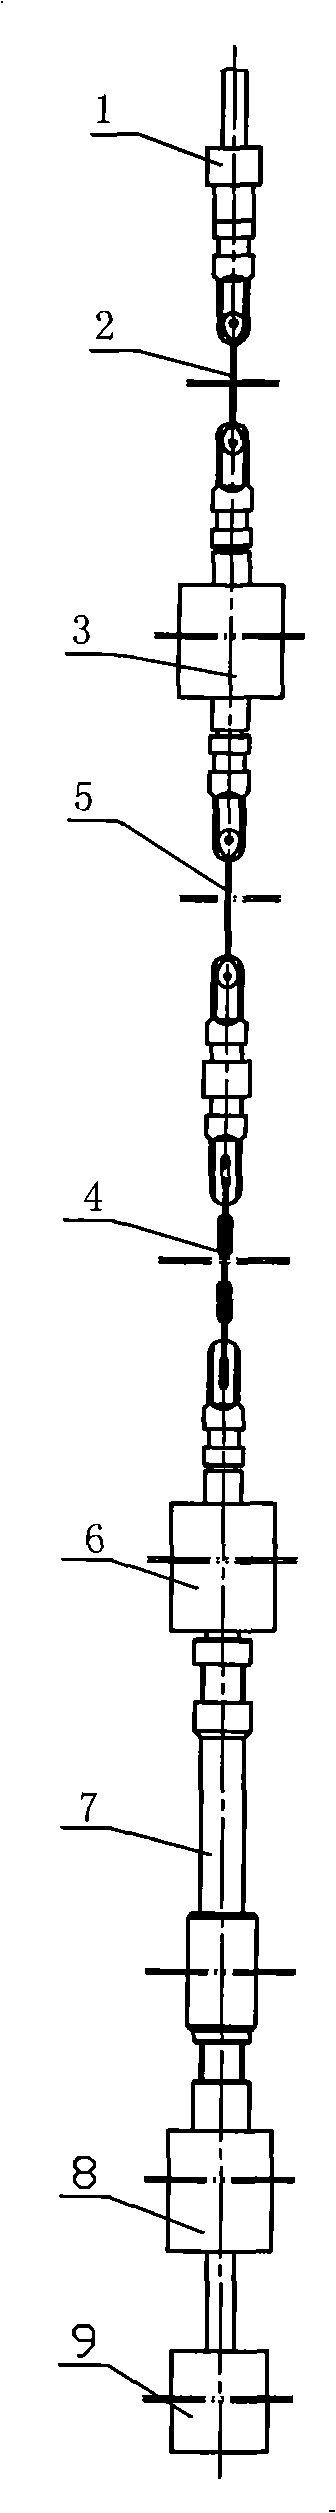 Hoisting system of stripper well in oil field